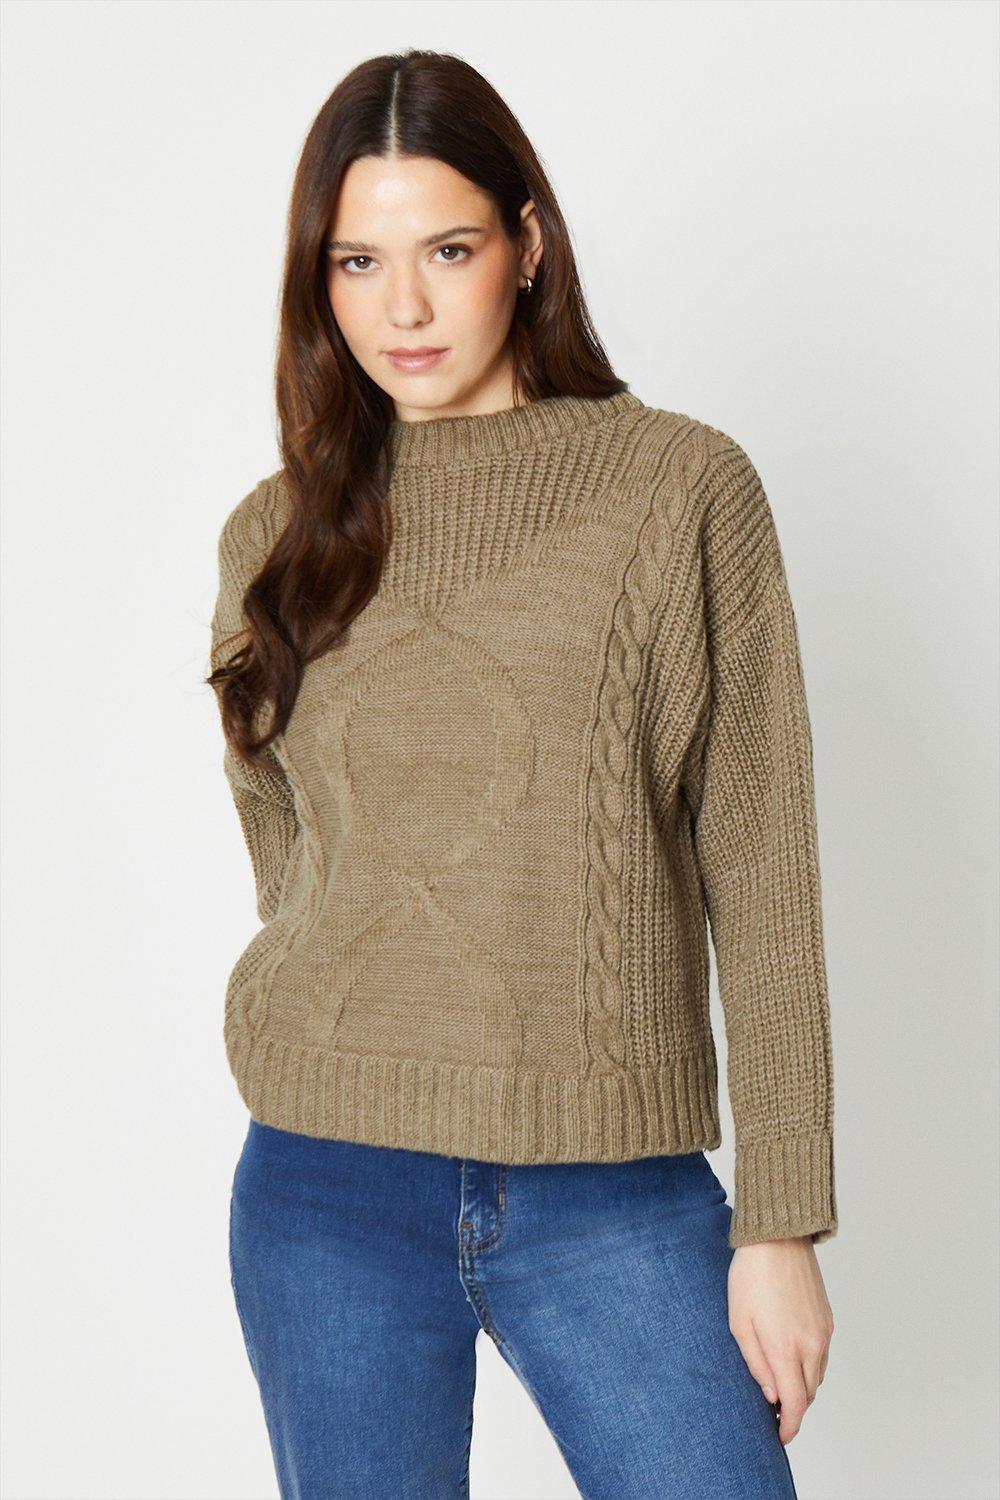 Women's Wide Sleeve Cable Fluffy Knit Jumper - khaki - M